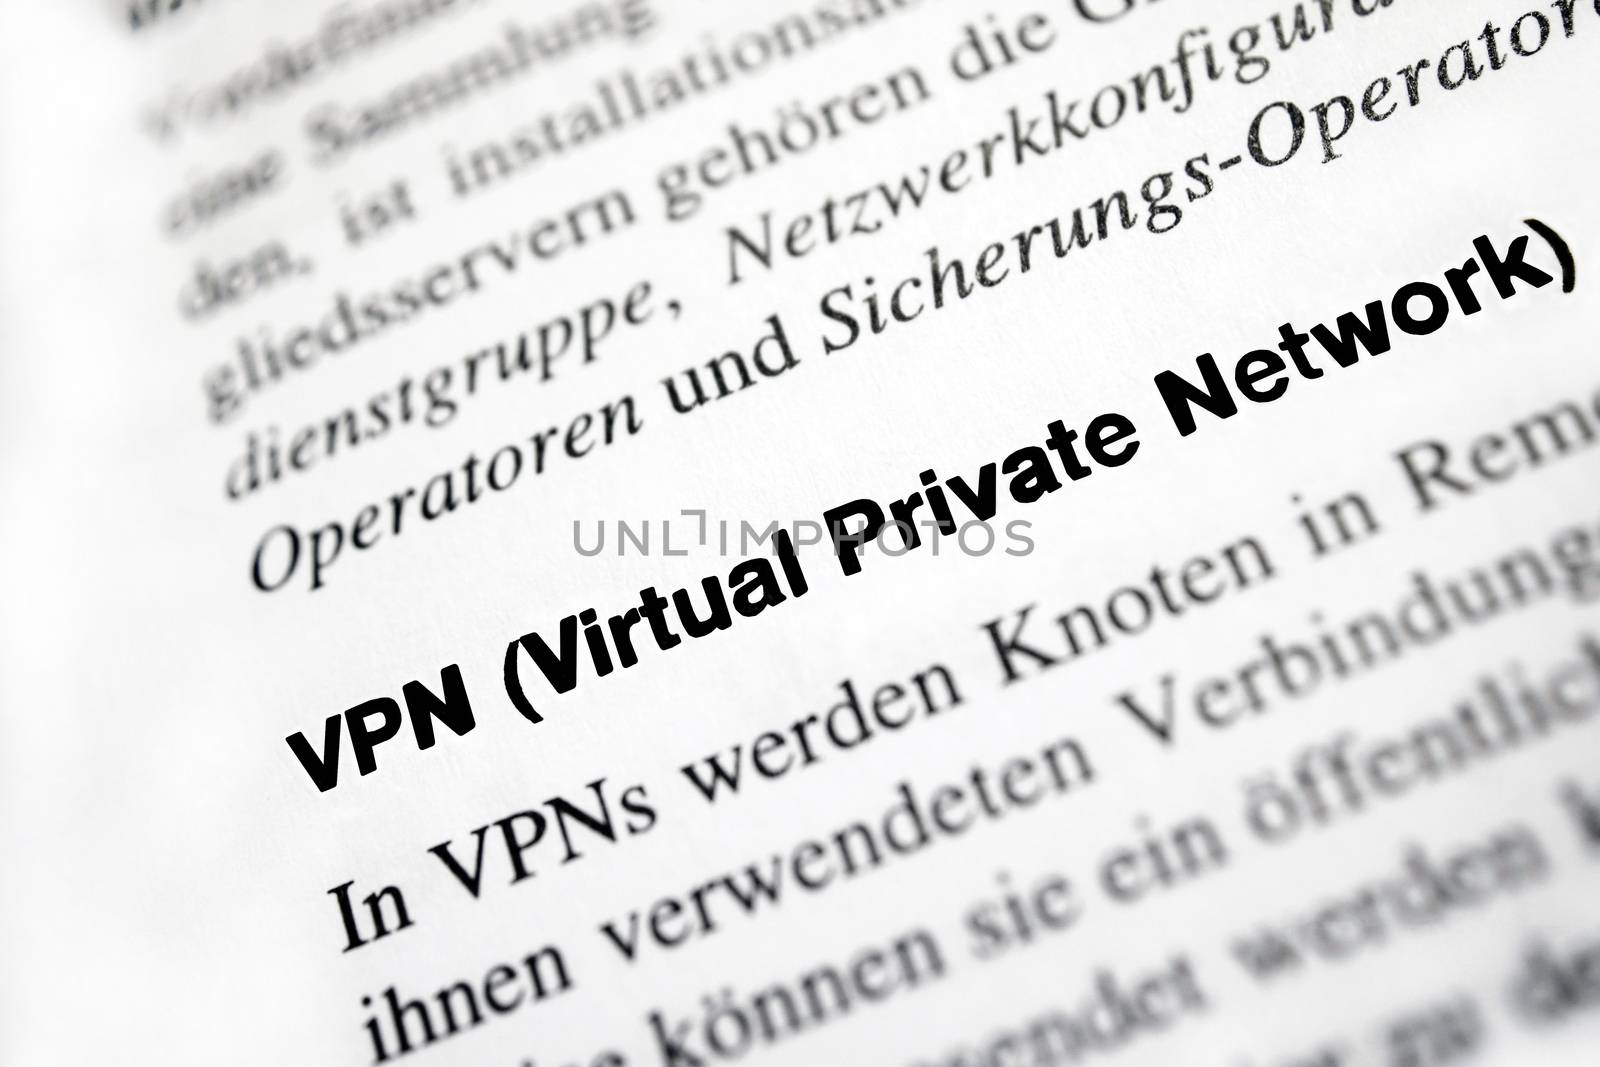 VPN (Virtual Private Network) is a technology that allows it to authorized computers from all over the Internet to access the private or local network of a company, institution, etc. and is used for the secure exchange of data.